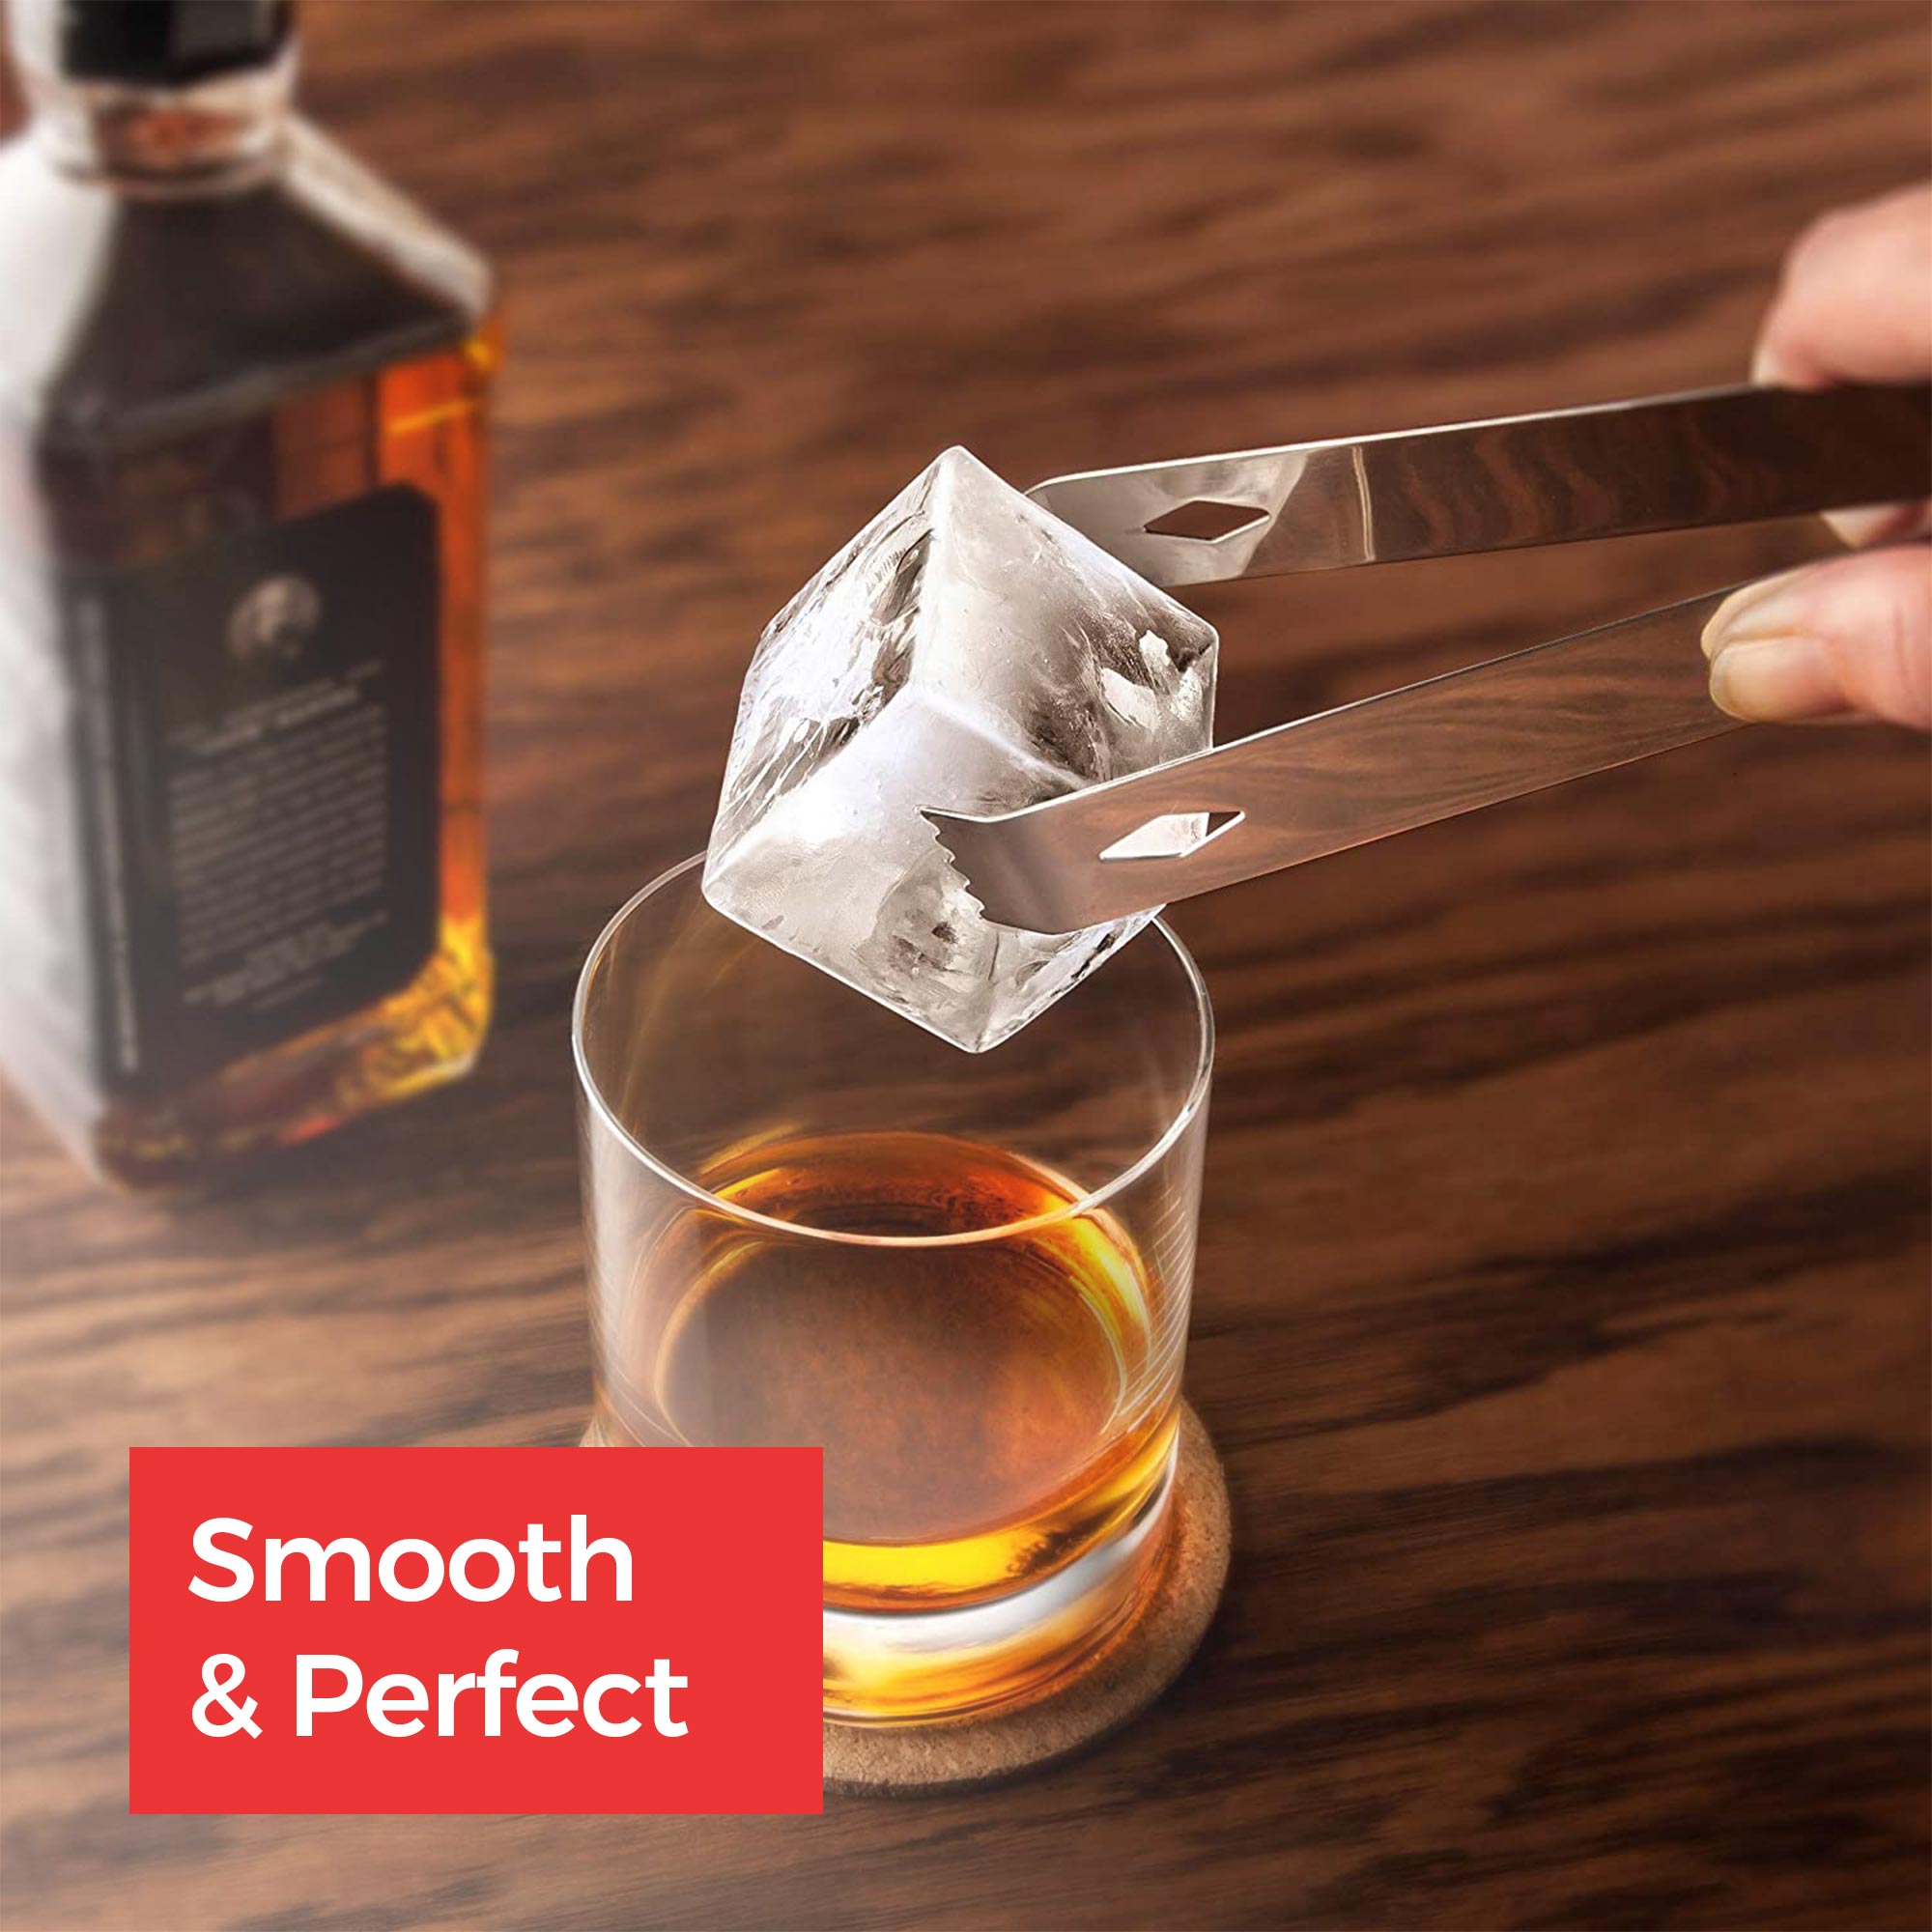 Ice Cube Trays, Large Square & Round Ice Cubes - Melt Slowly To Keep Whisky  & Drinks Cool Longer And Fresher - Easy To Release - Premium Silicone Ice